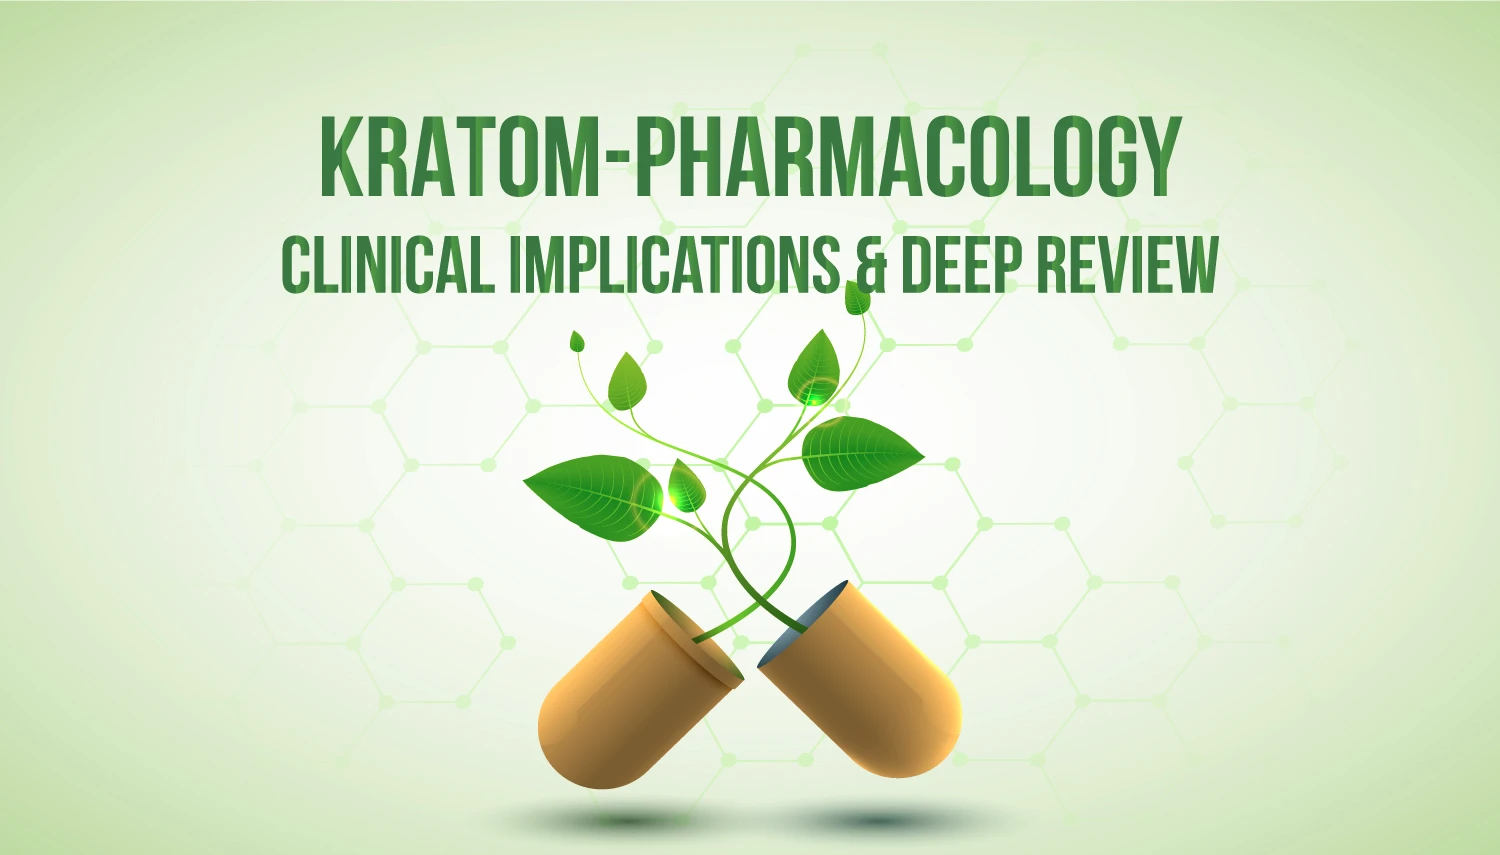 Kratom-Pharmacology, Clinical Implications and Deep Review